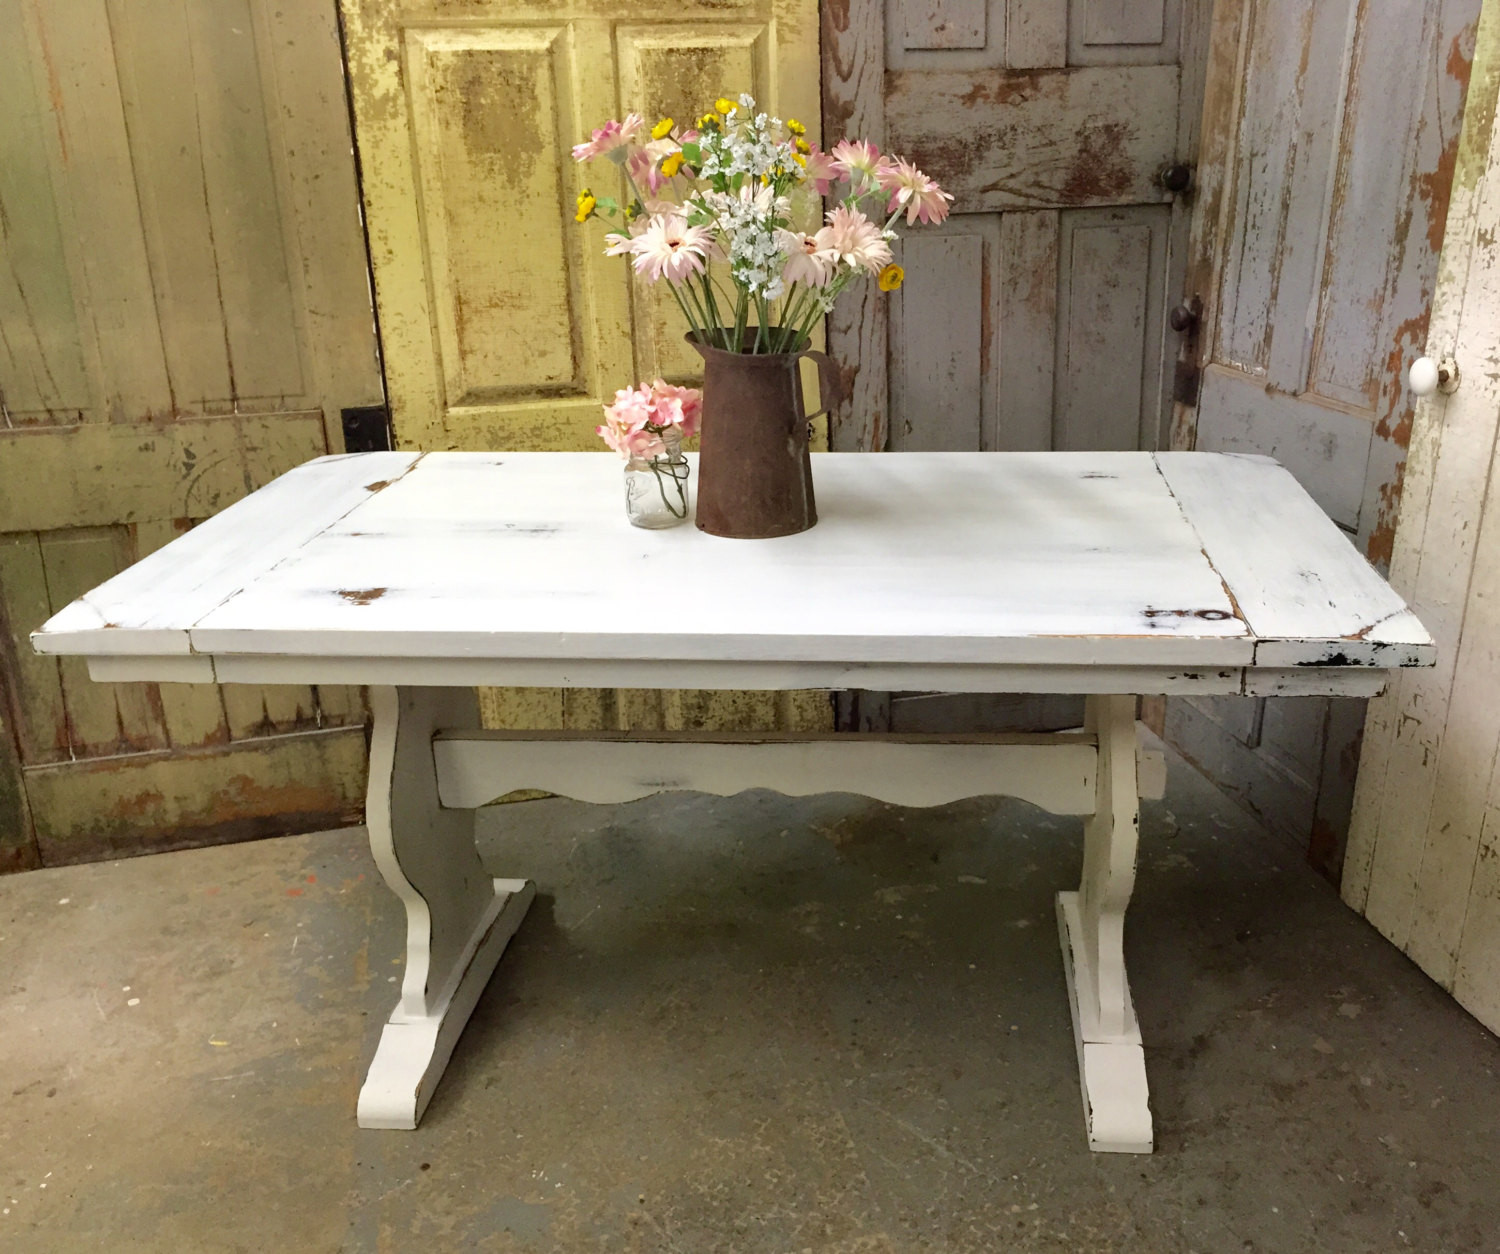 White Rustic Kitchen Table
 White Kitchen Table Rustic Dining Room Table Painted